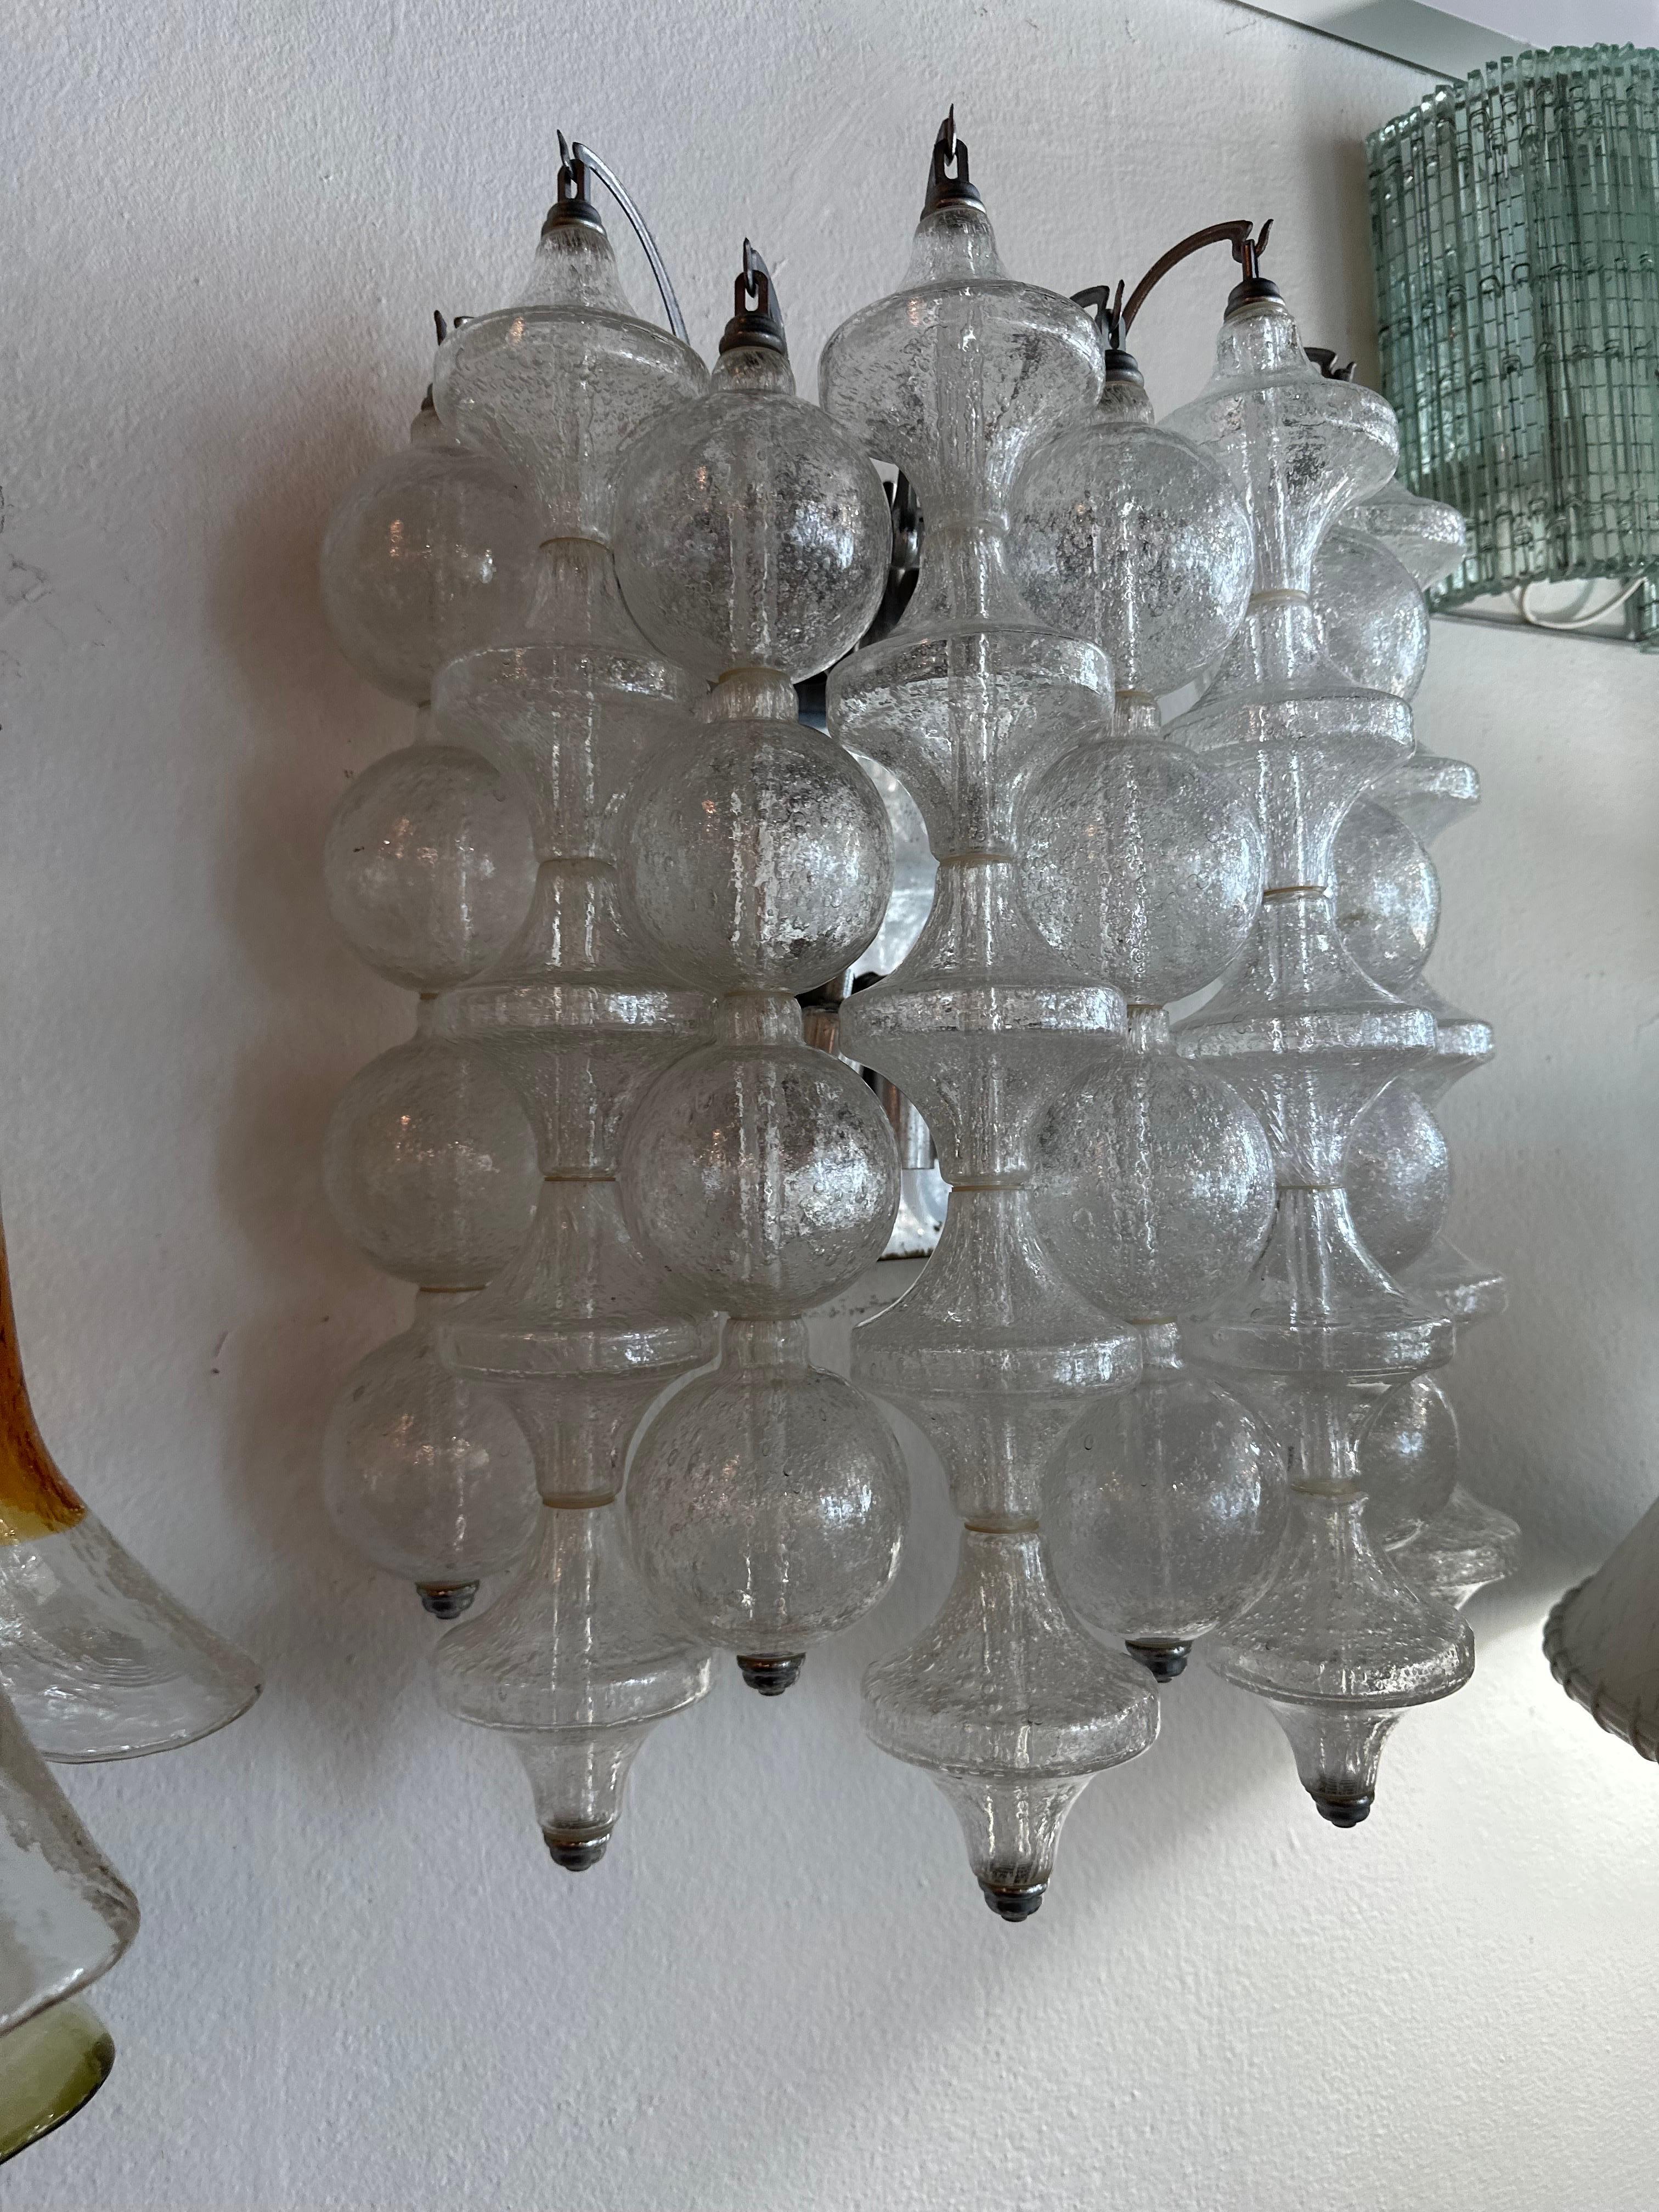 Beautiful vintage wall light sconce by J. T. Kalmar Tulipan, This has 9 rows of bells and bubbles. Holds 8 light bulbs. No chips or breaks to glass pieces. Patina to fixture. Dimensions: 19 H x 16 W x 8 D.